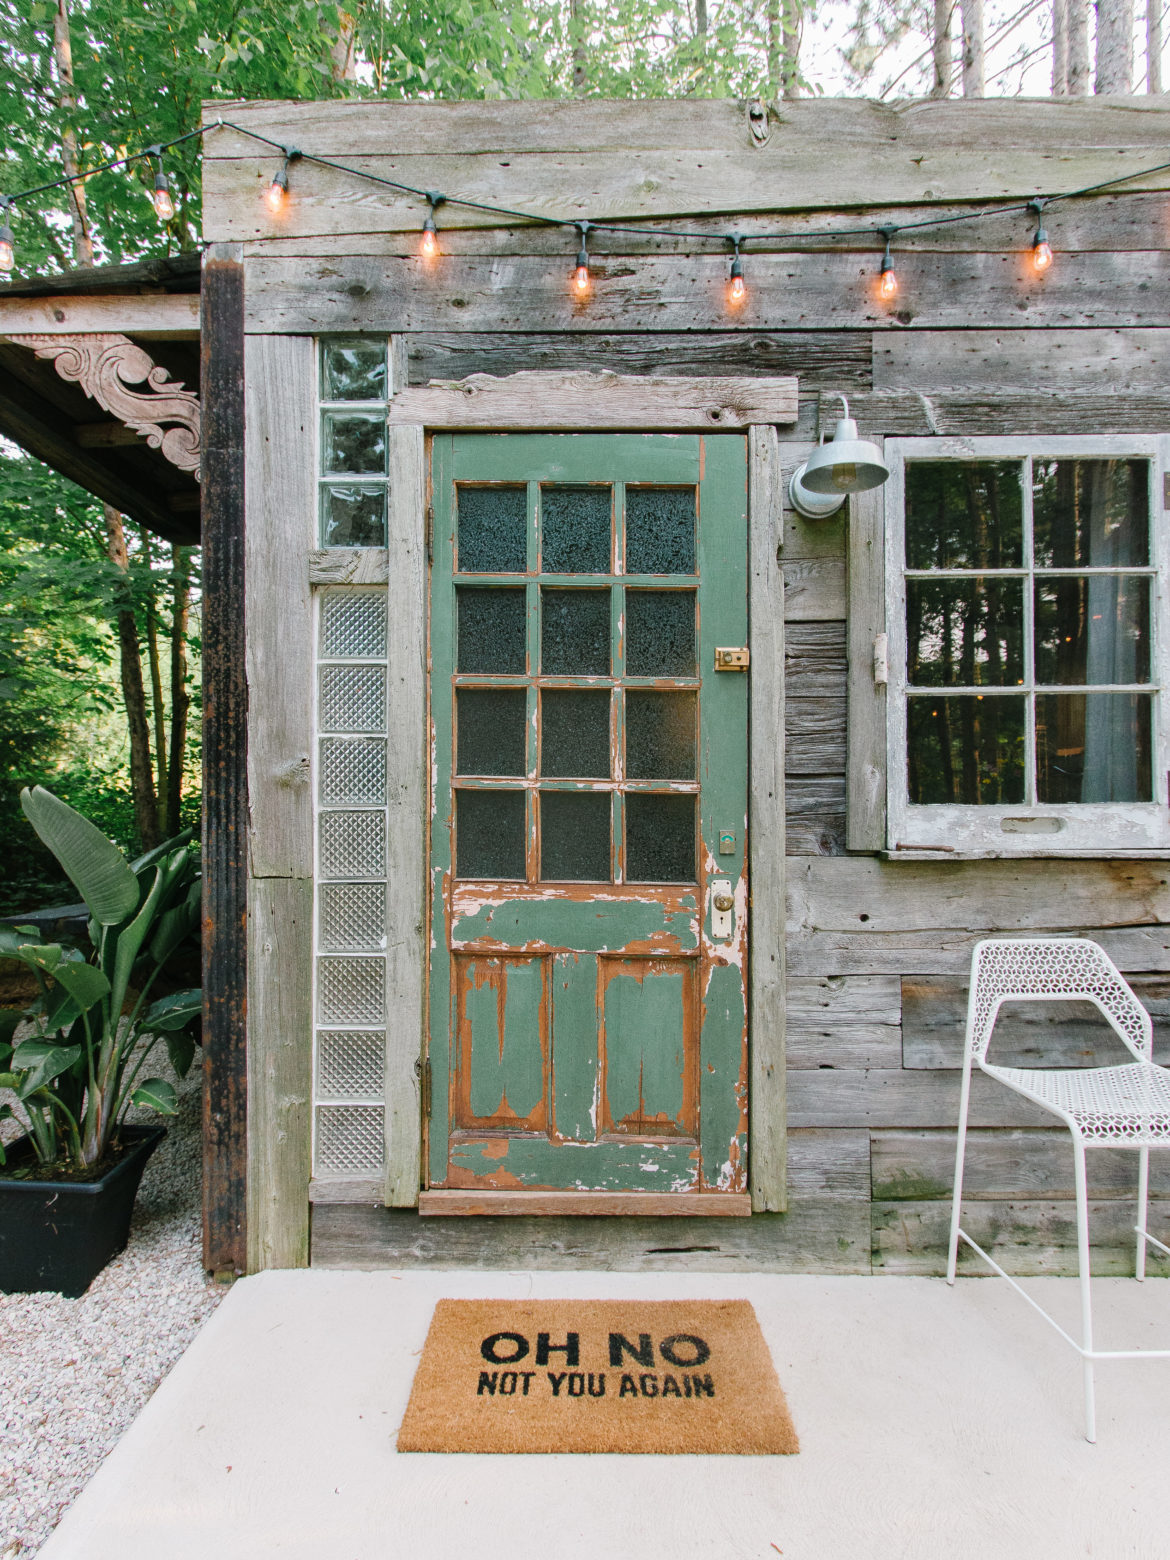 Treehouse + Cabin Home Tour | Need some styling and cozying up interior ideas? We gotcha covered | www.lynneknowlton.com 